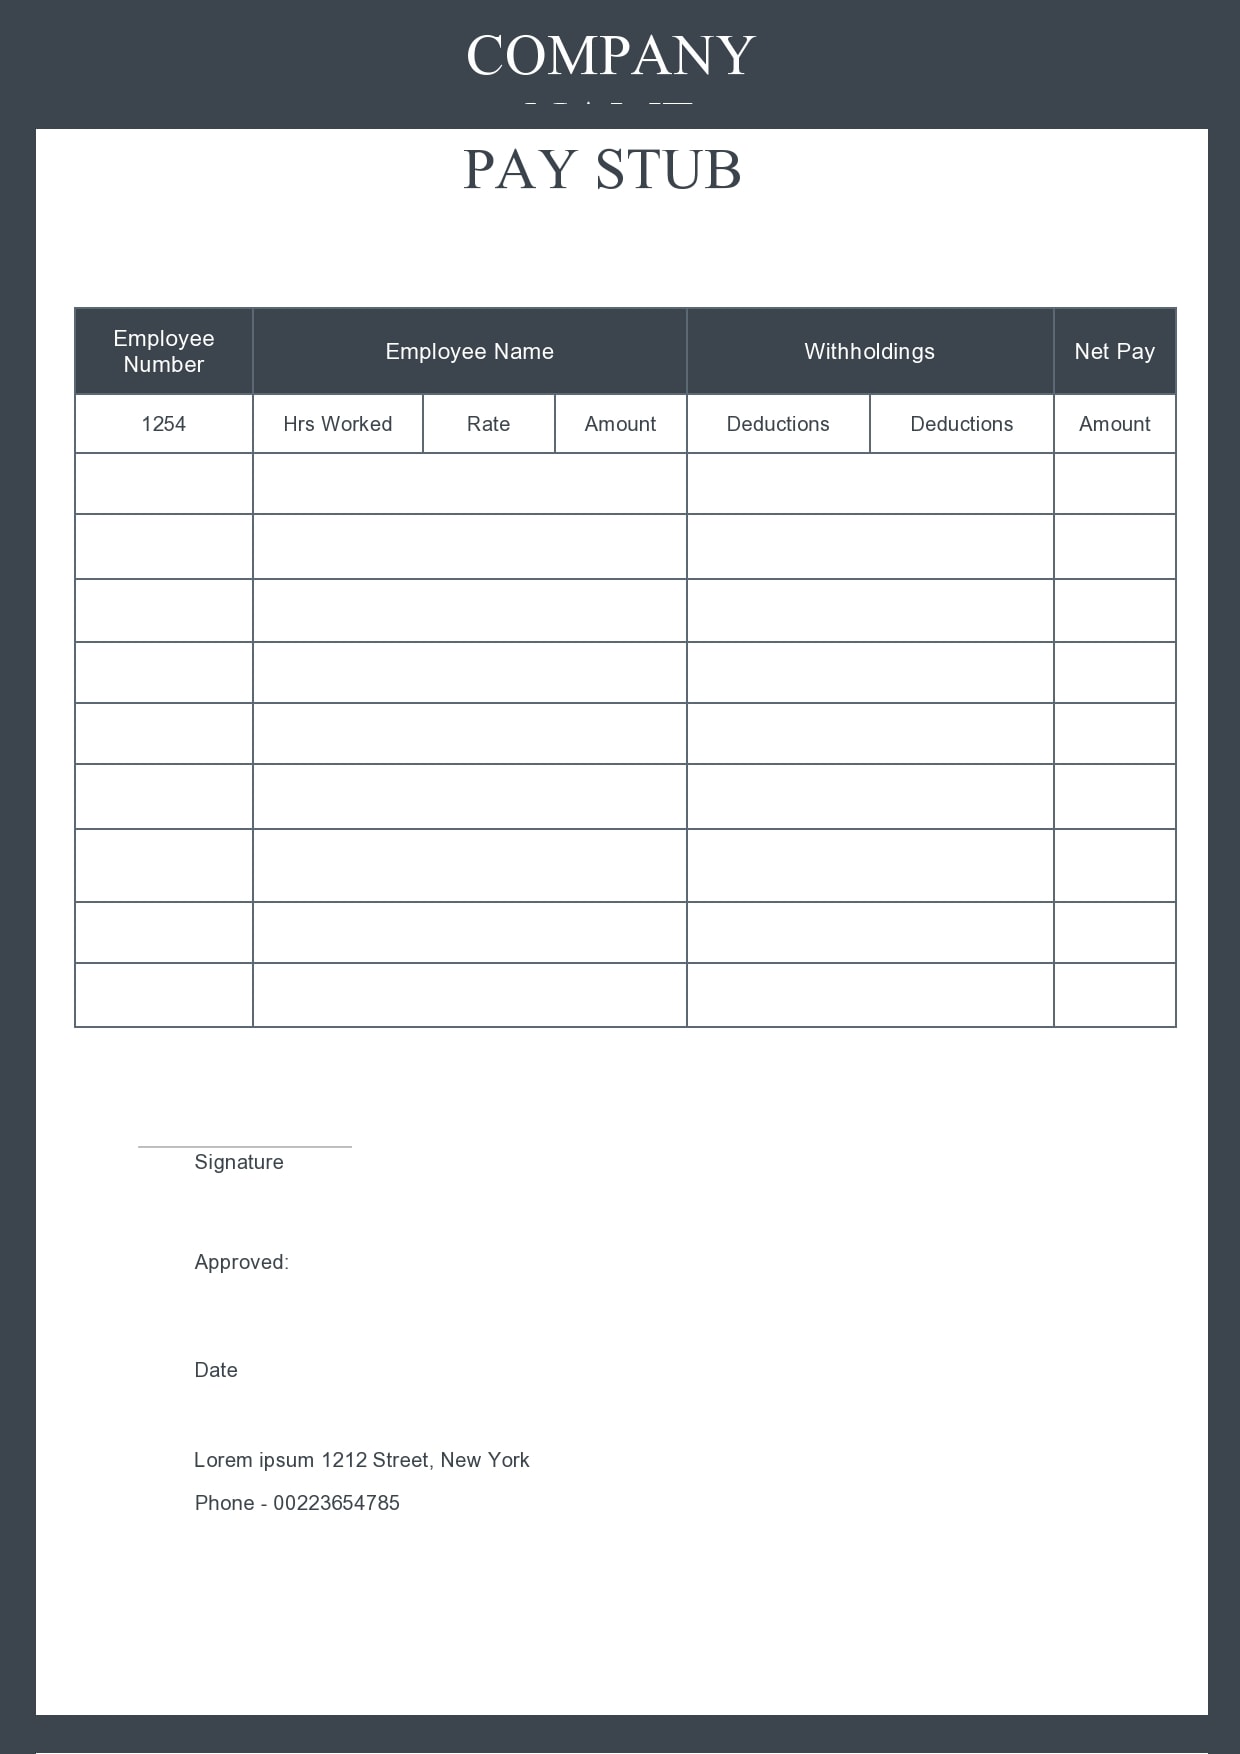 24 Free Pay Stub Templates [Excel, Word] - PrintableTemplates For Pay Stub Template Word Document